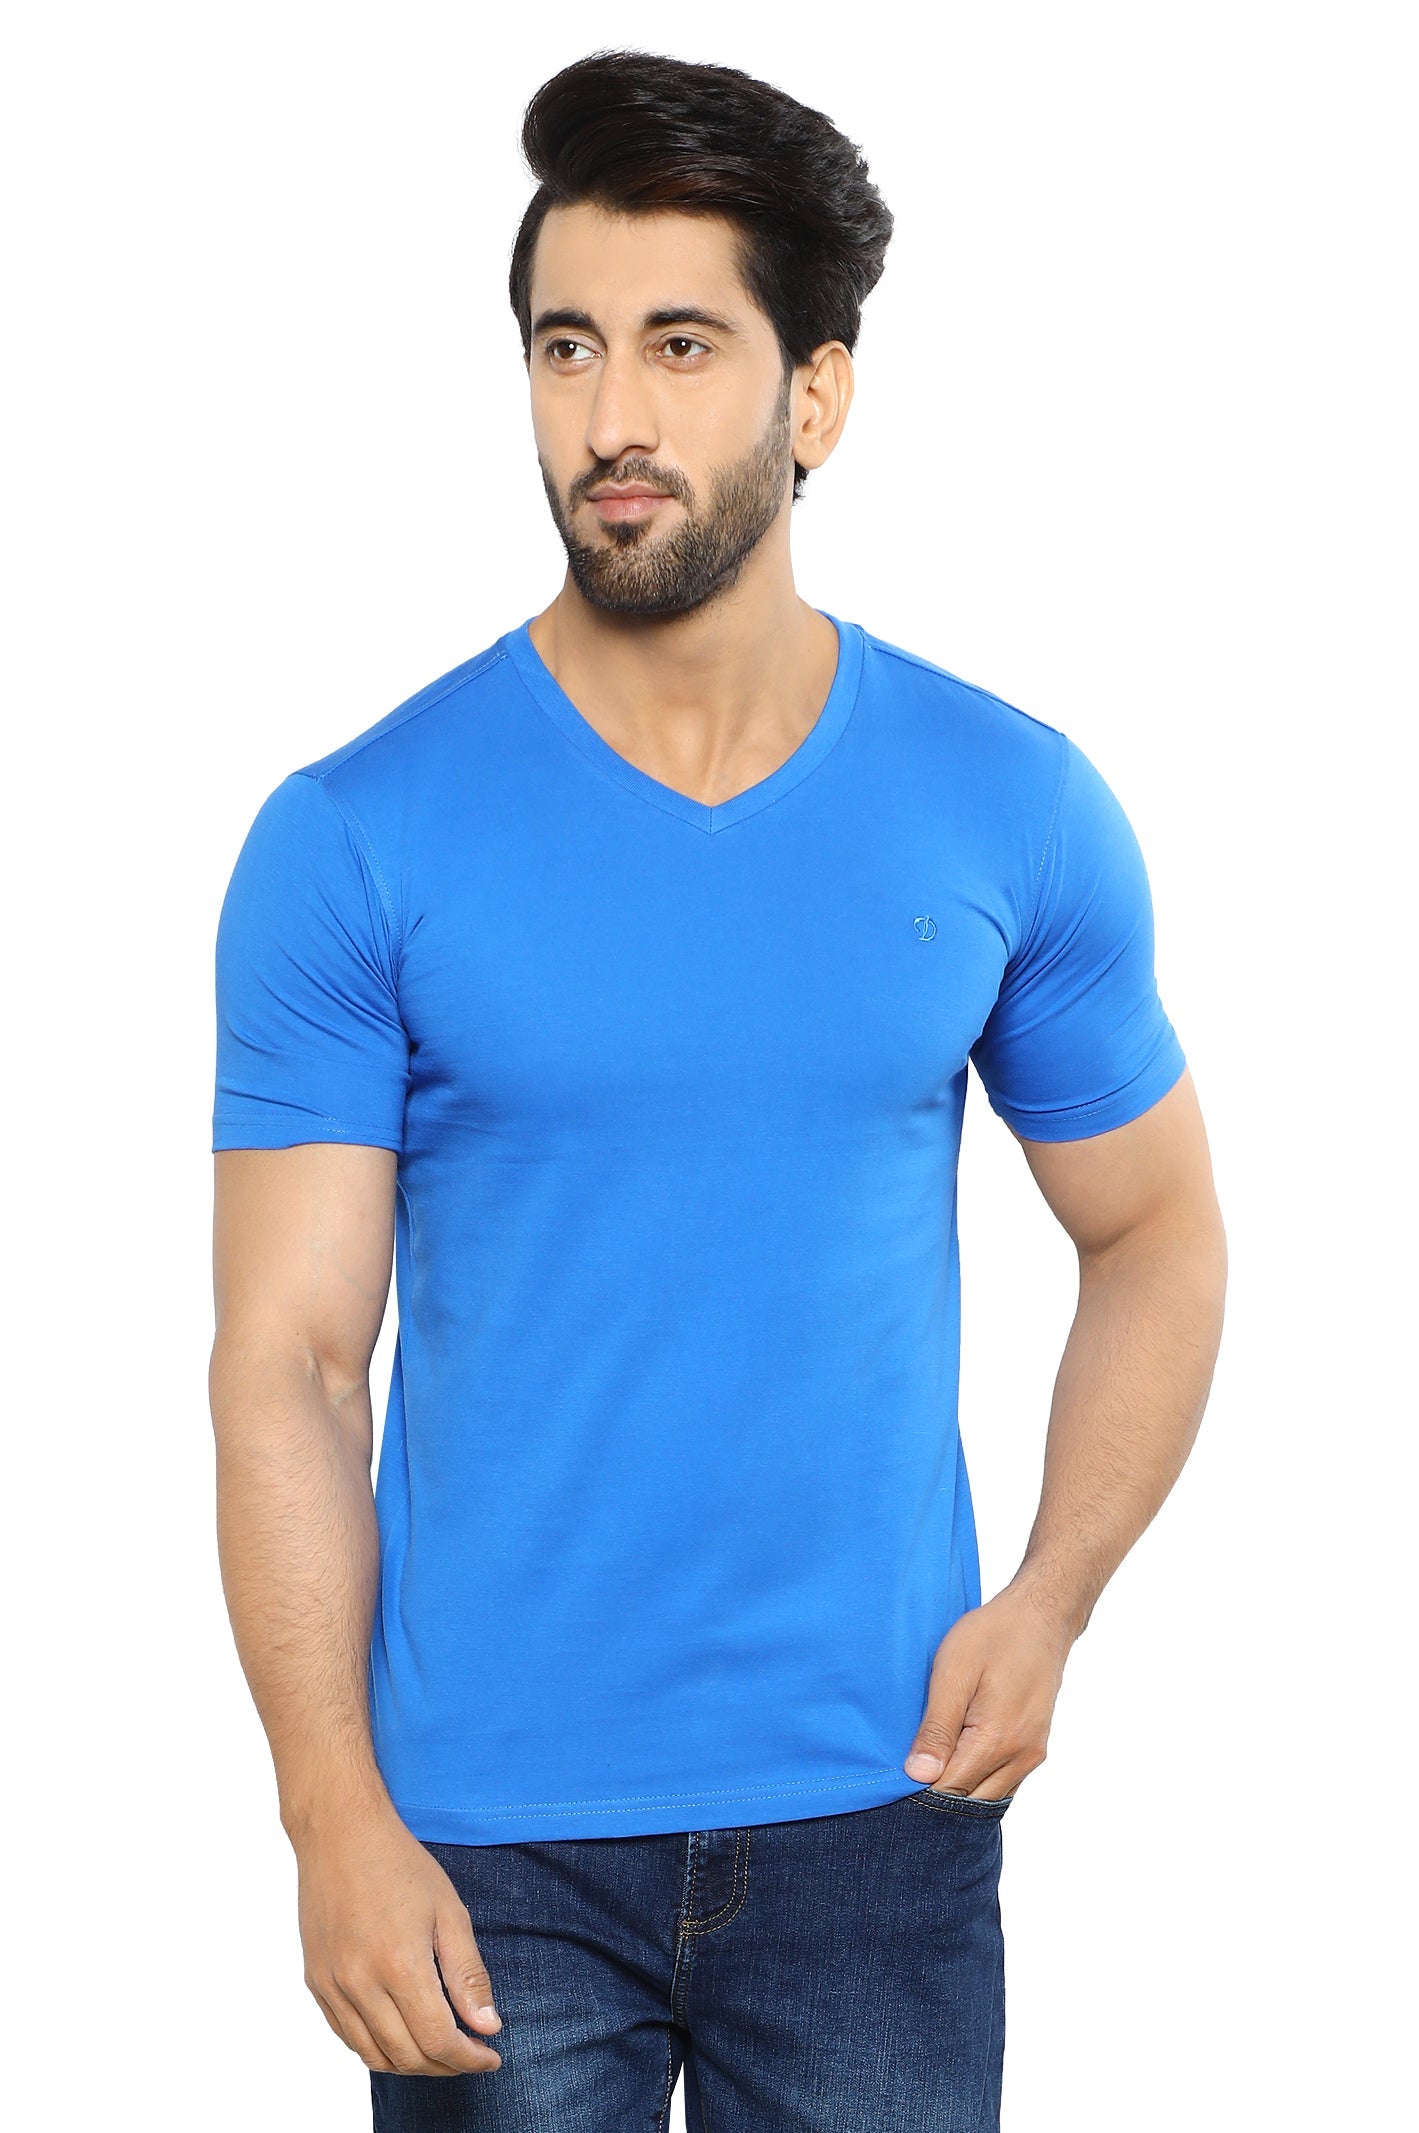 Diners Men's Round Neck T-Shirt SKU: NA857-R-BLUE - Diners